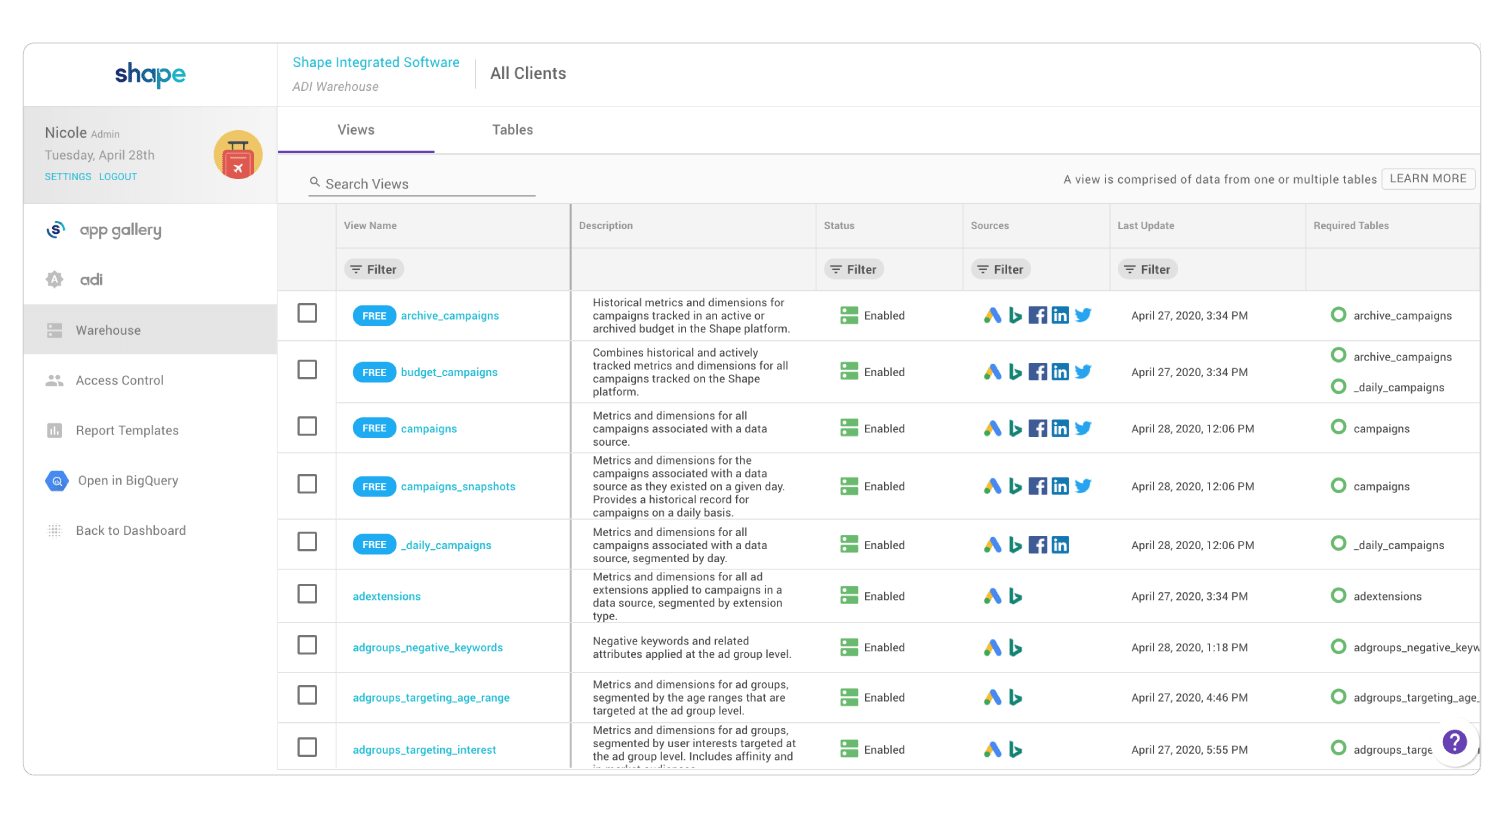 Shape ADI includes 6 campaign-level data views for free, plus 40+ views in total. Generate your own data warehouse today to start analyzing your campaign-level performance.